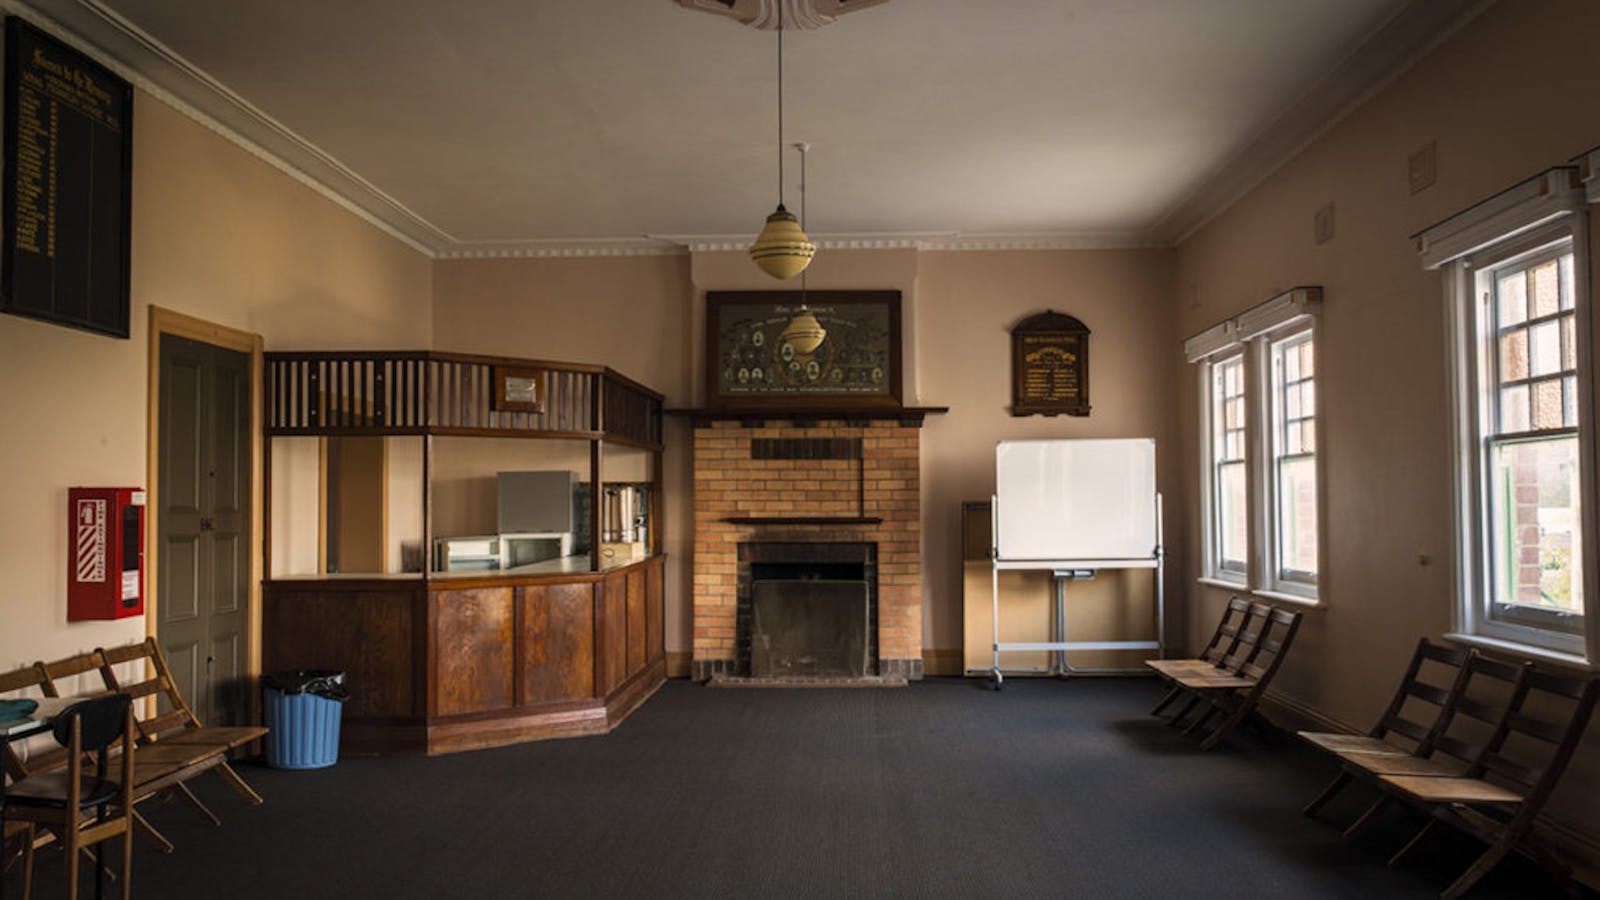 The Upstairs Supper Room has seating for up to 50, standing room for 70 and views of the Huon River